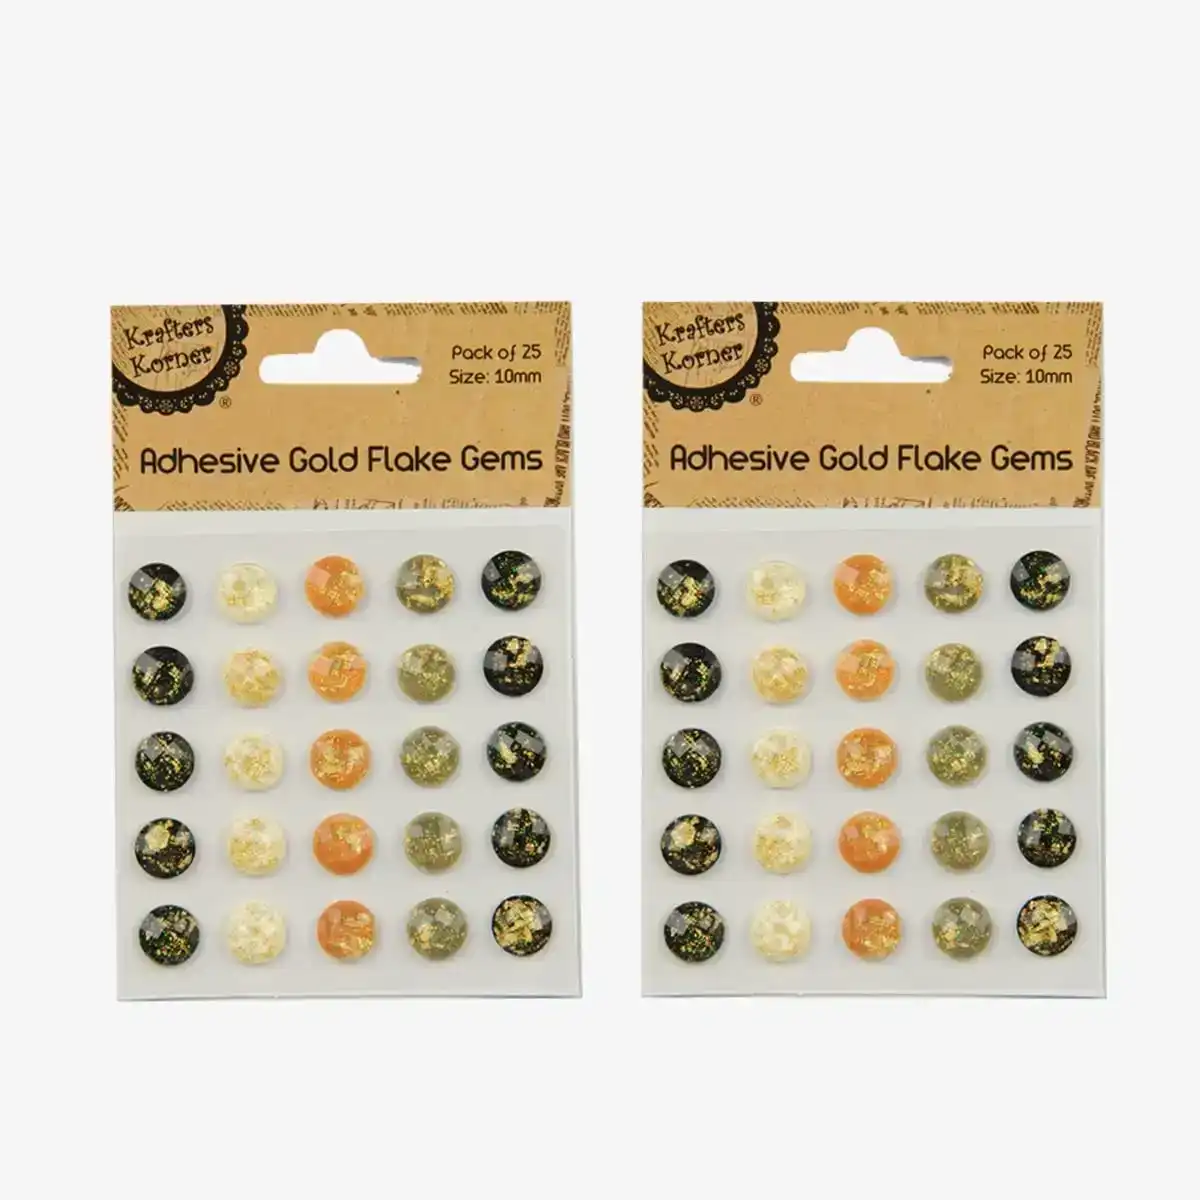 [2Pk X 25Pce] Krafters Korner Adhesive Gold Flake Gems - Assorted Colors (10Mm)